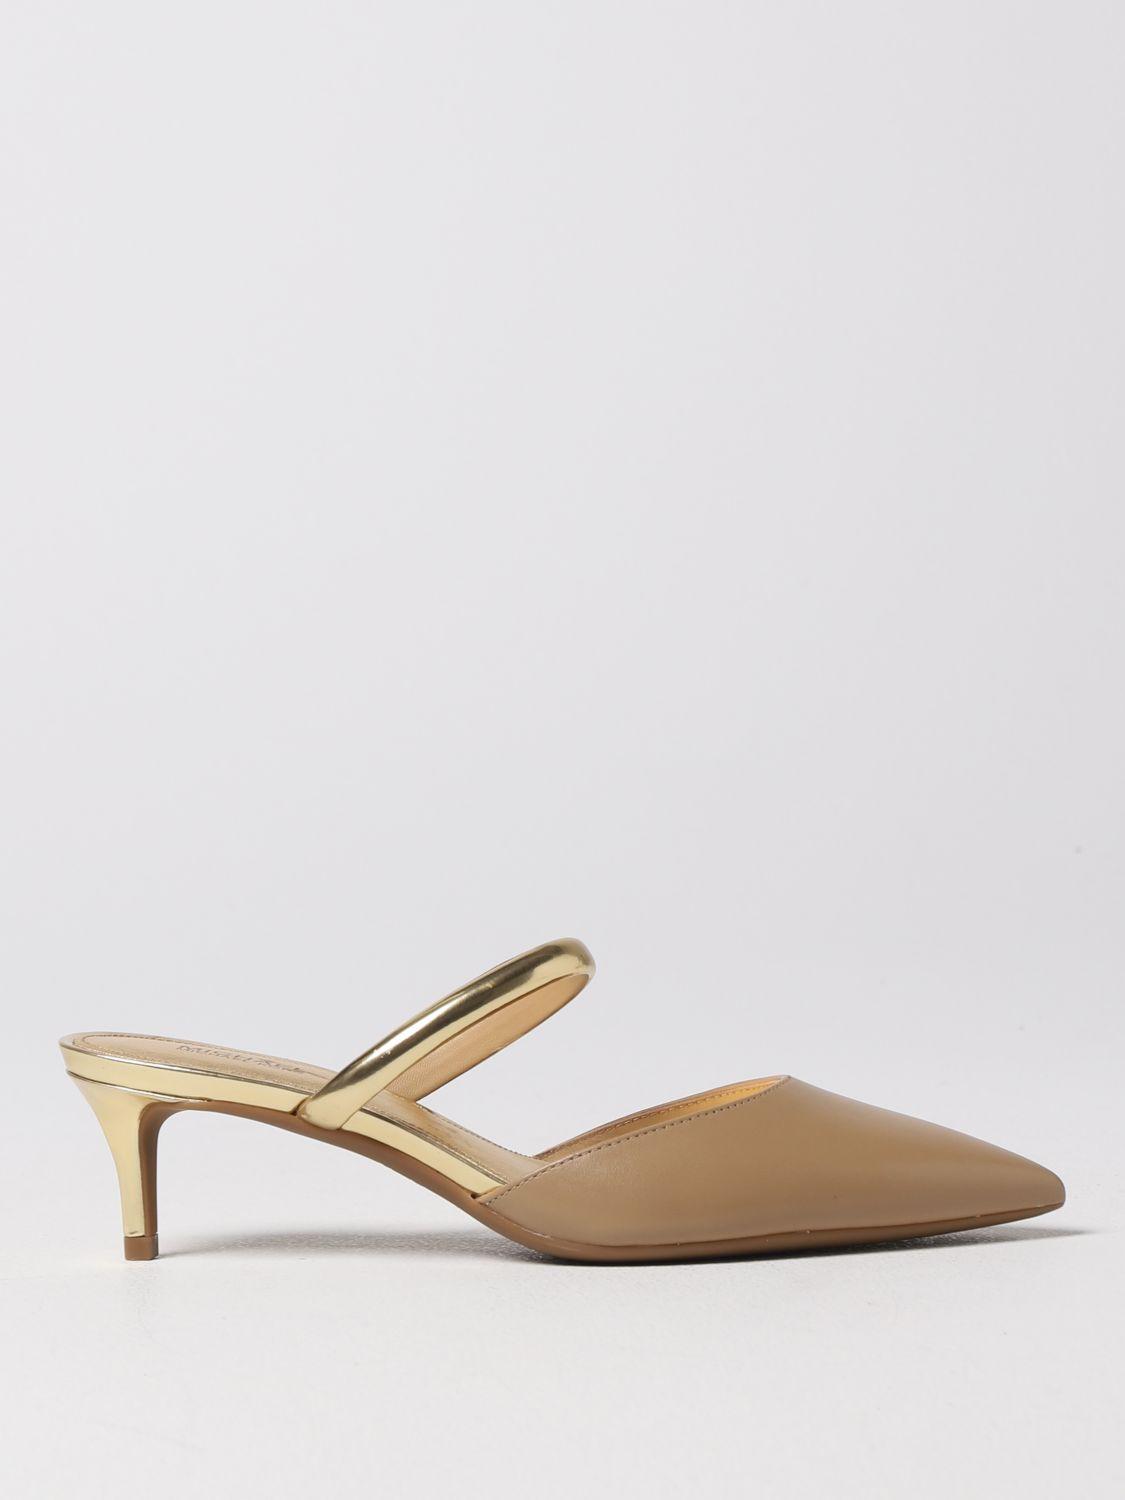 Michael Kors Heeled Sandals in White | Lyst Canada